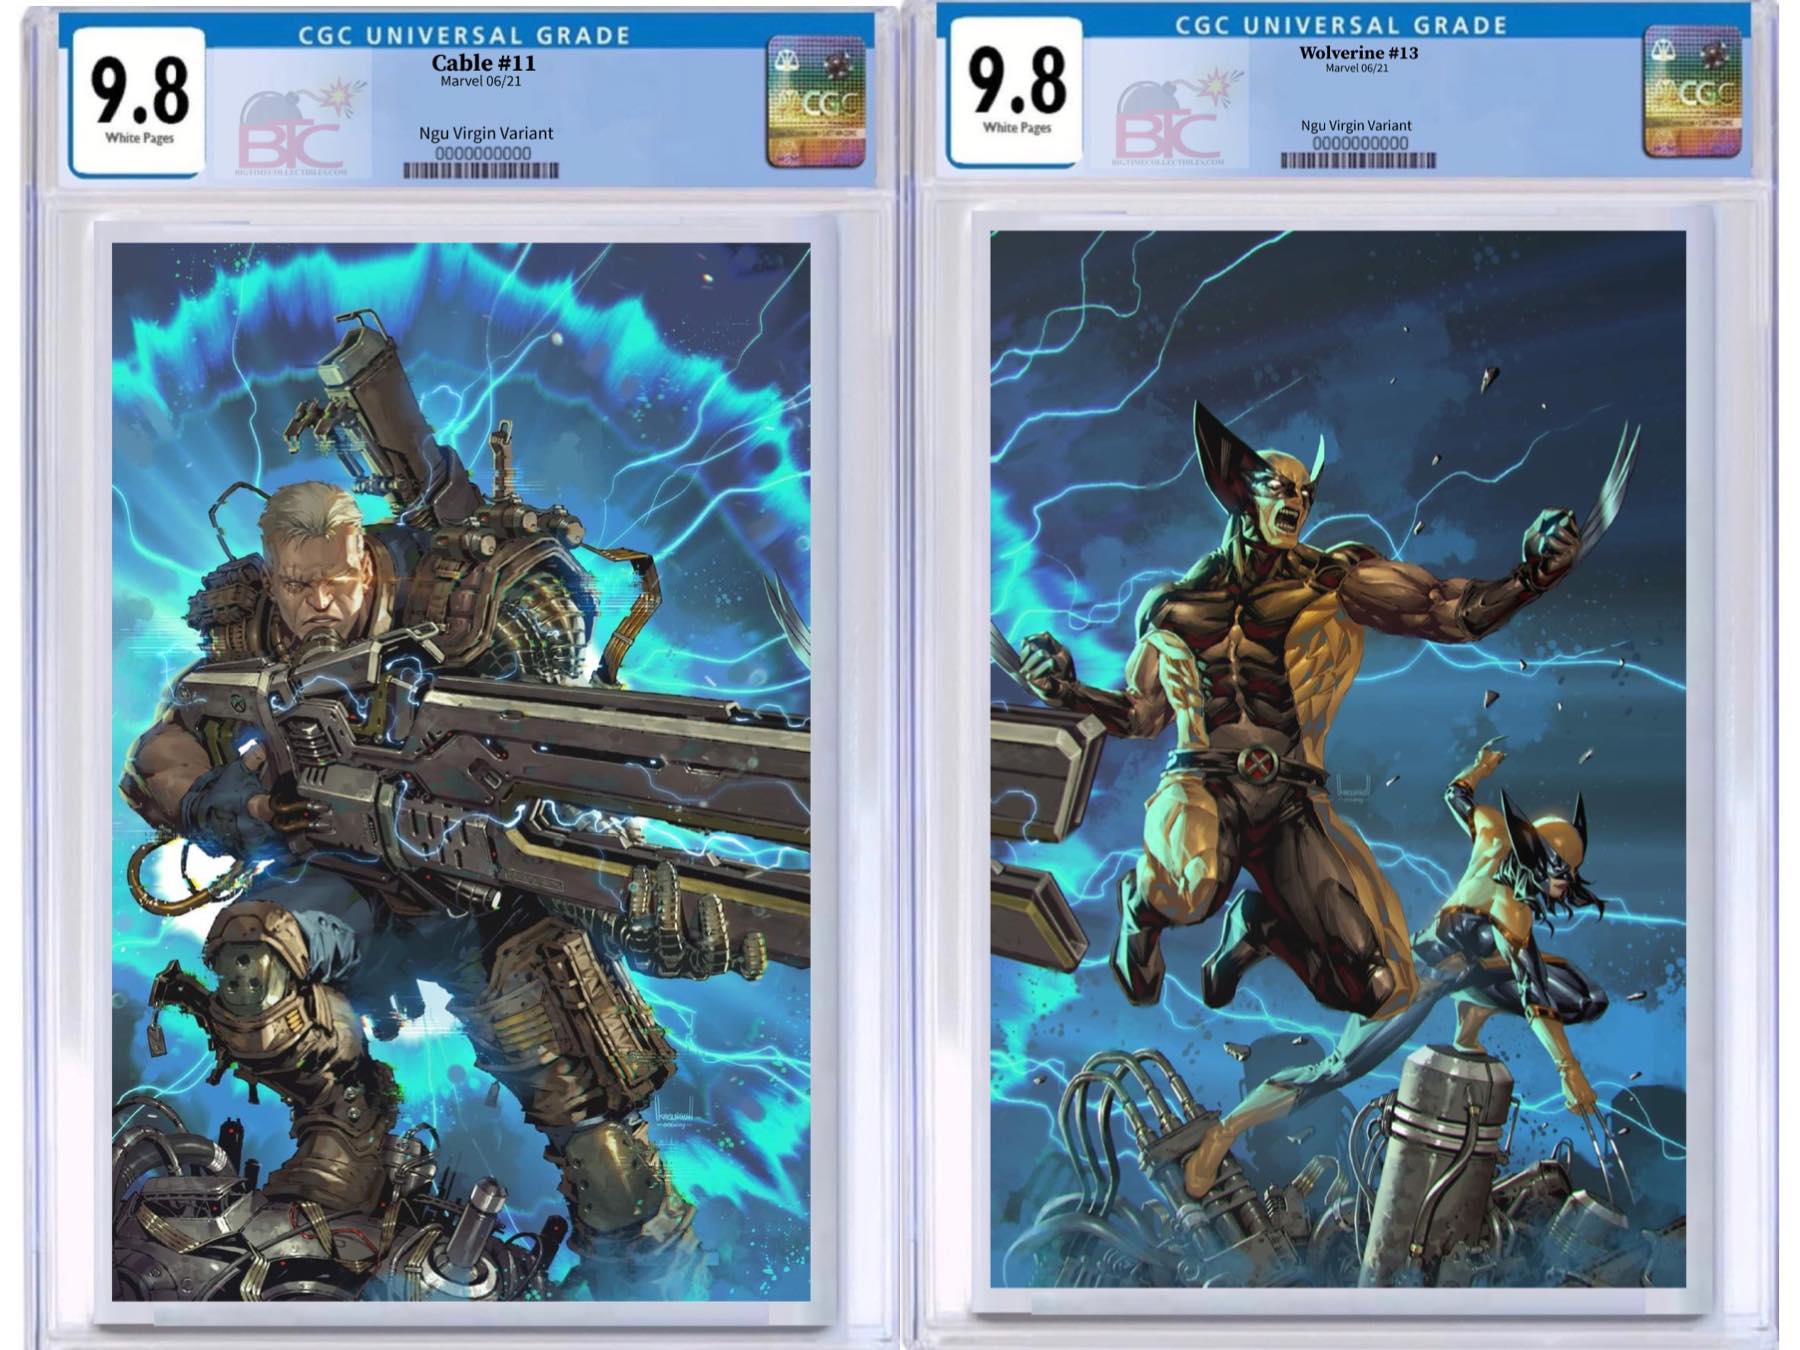 WOLVERINE #13 & CABLE #11 KAEL NGU CONNECTING TRADING CARD SERIES ONE EXCLUSIVE VARIANT